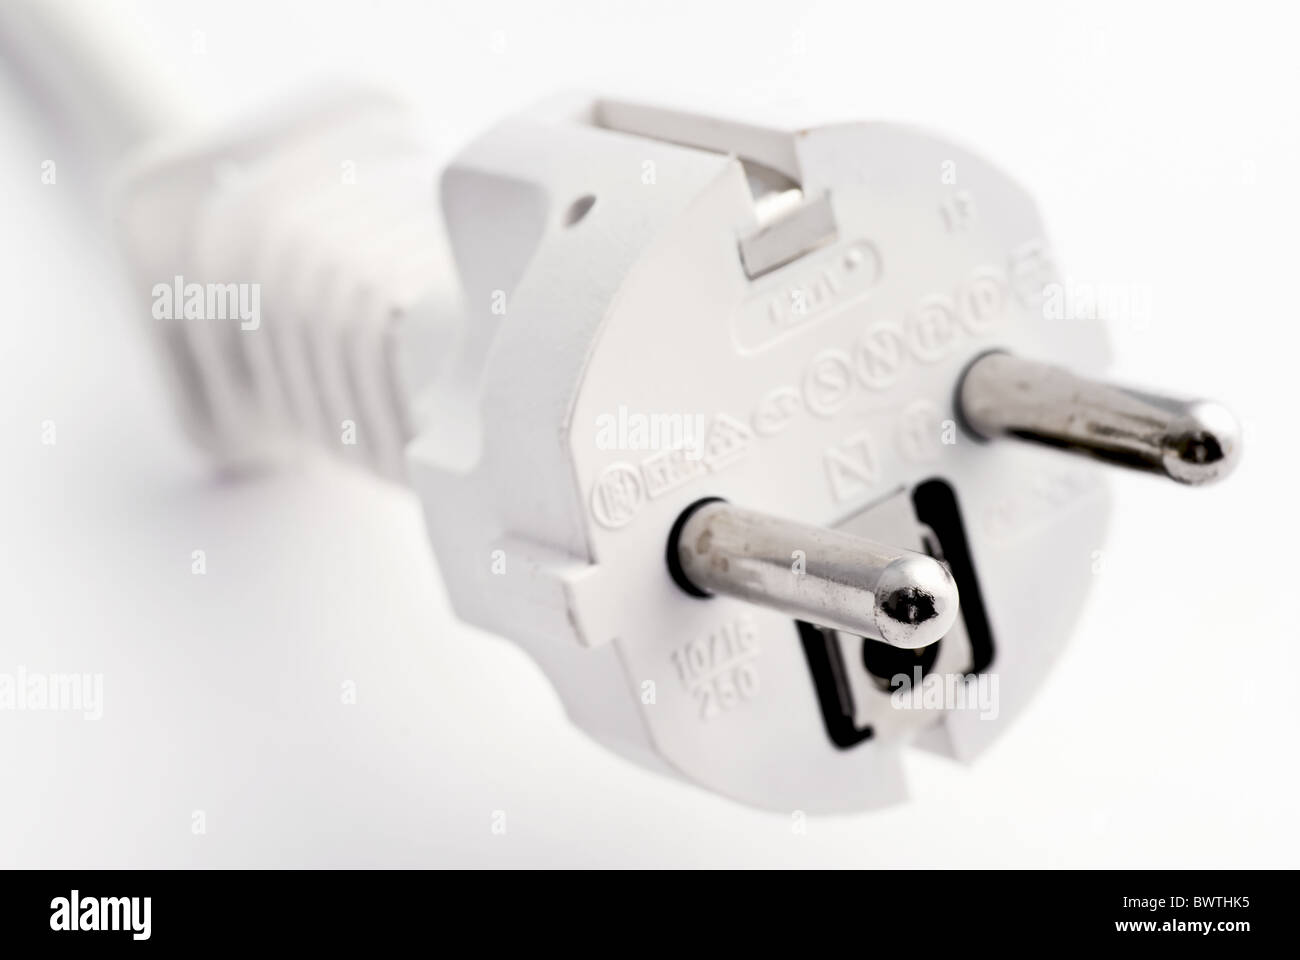 European Plug High Resolution Stock Photography and Images - Alamy